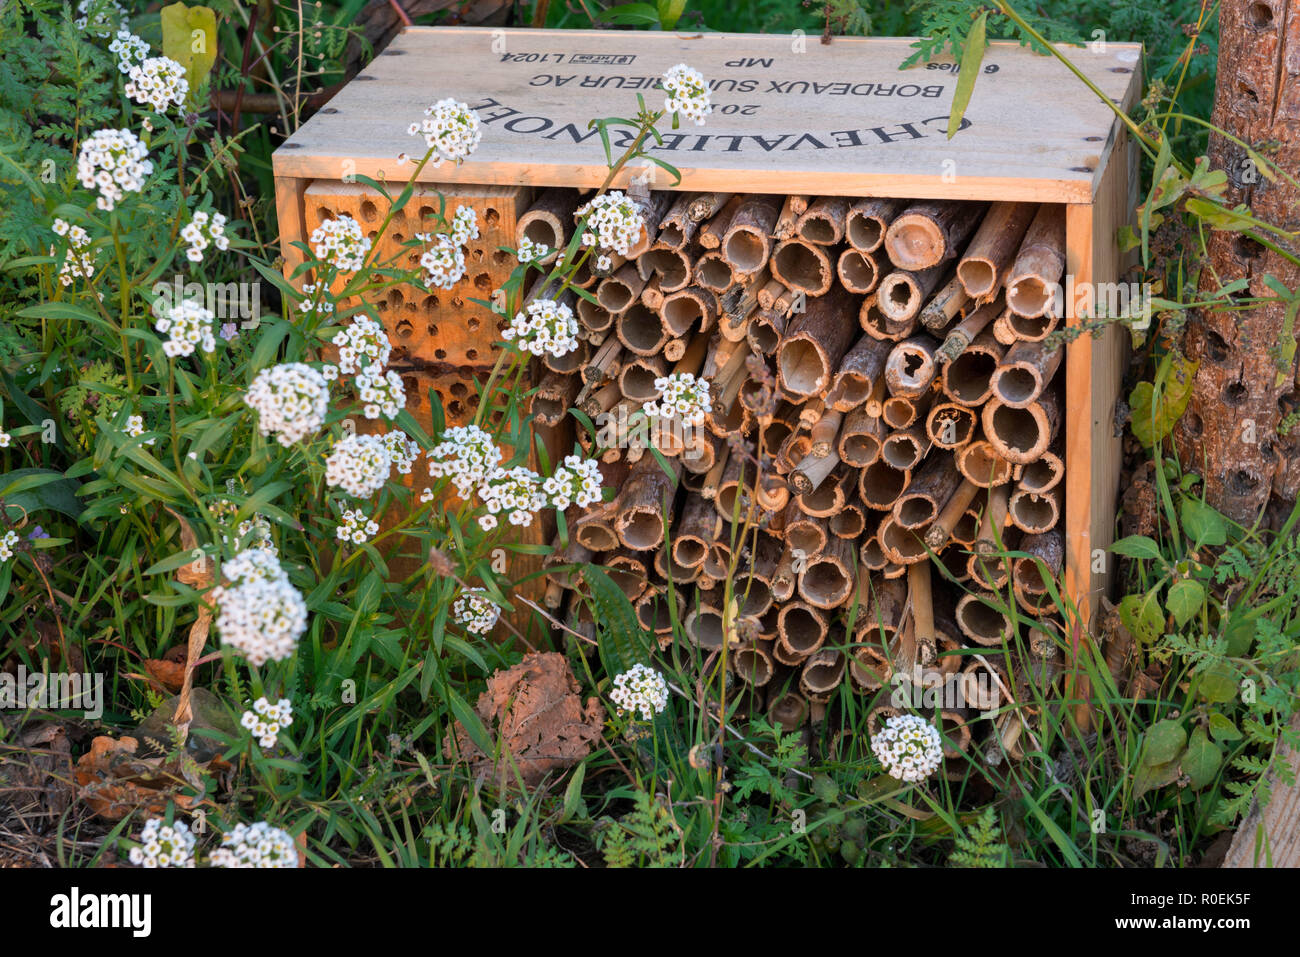 Bee housing in holes and sticks in old wine crate Stock Photo